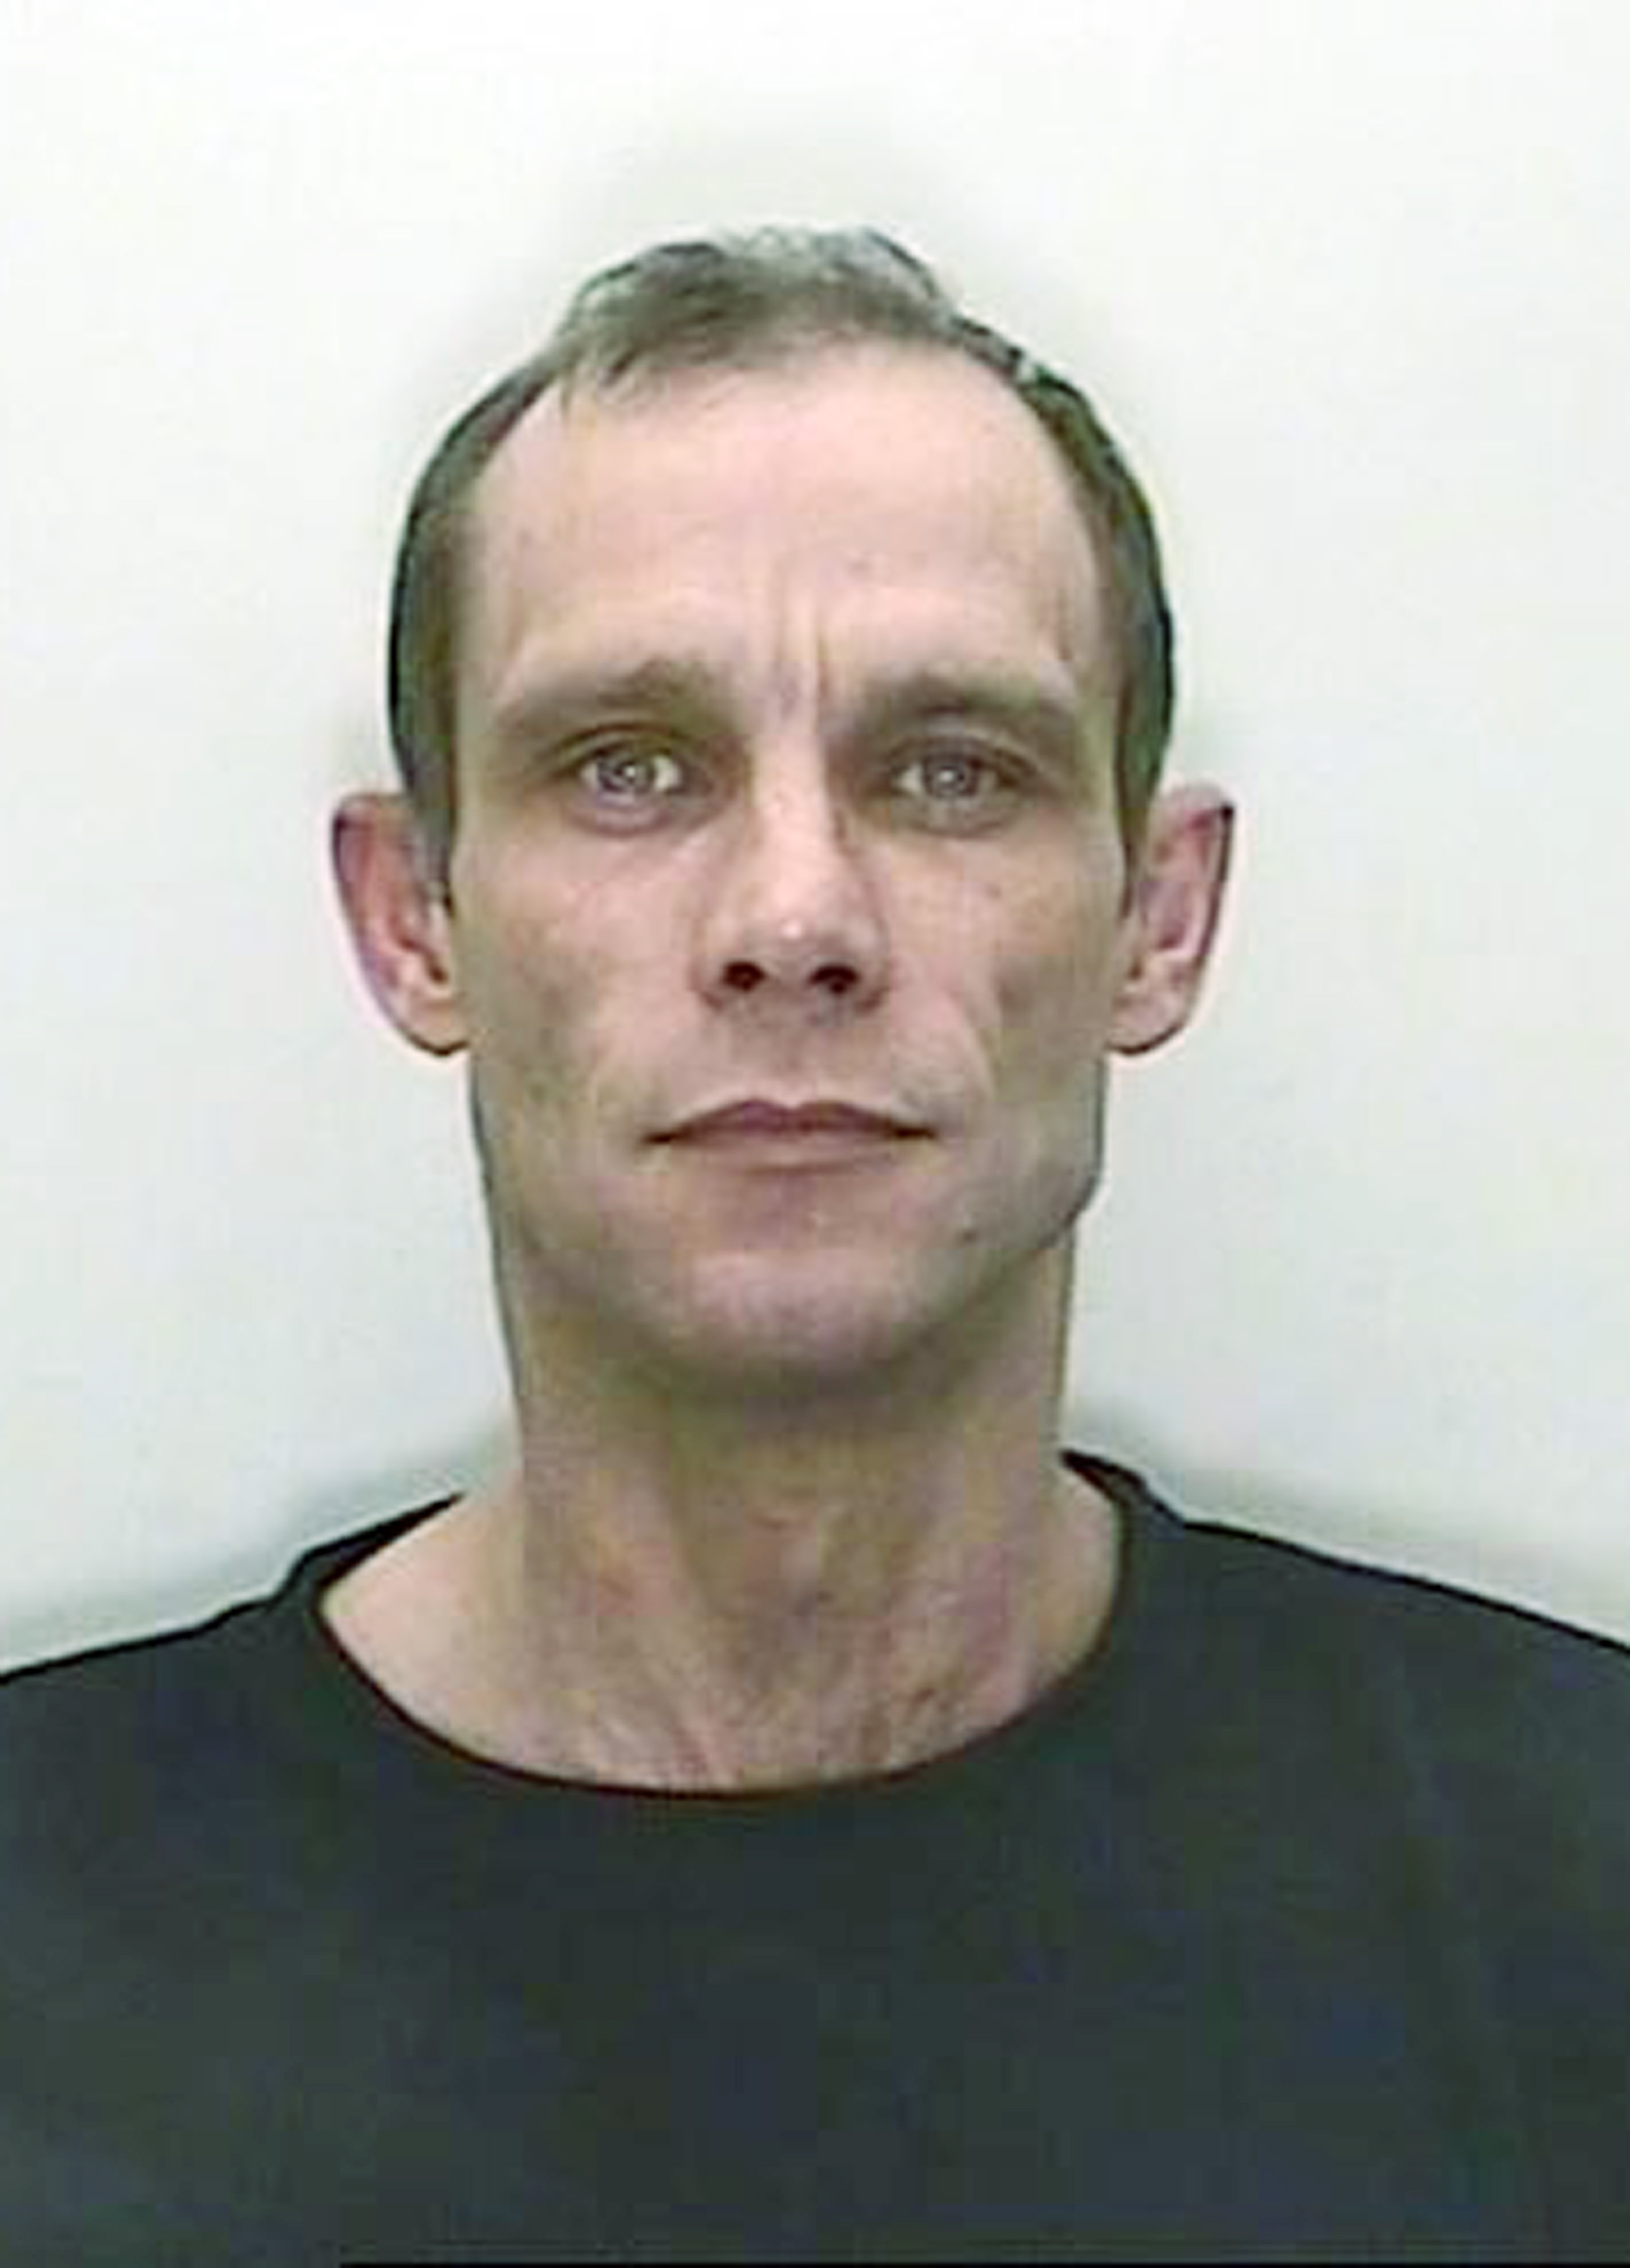 Where Is Christopher Halliwell Now? Bio Of The Murderer Of Sian O Callaghan- Is He In Jail?